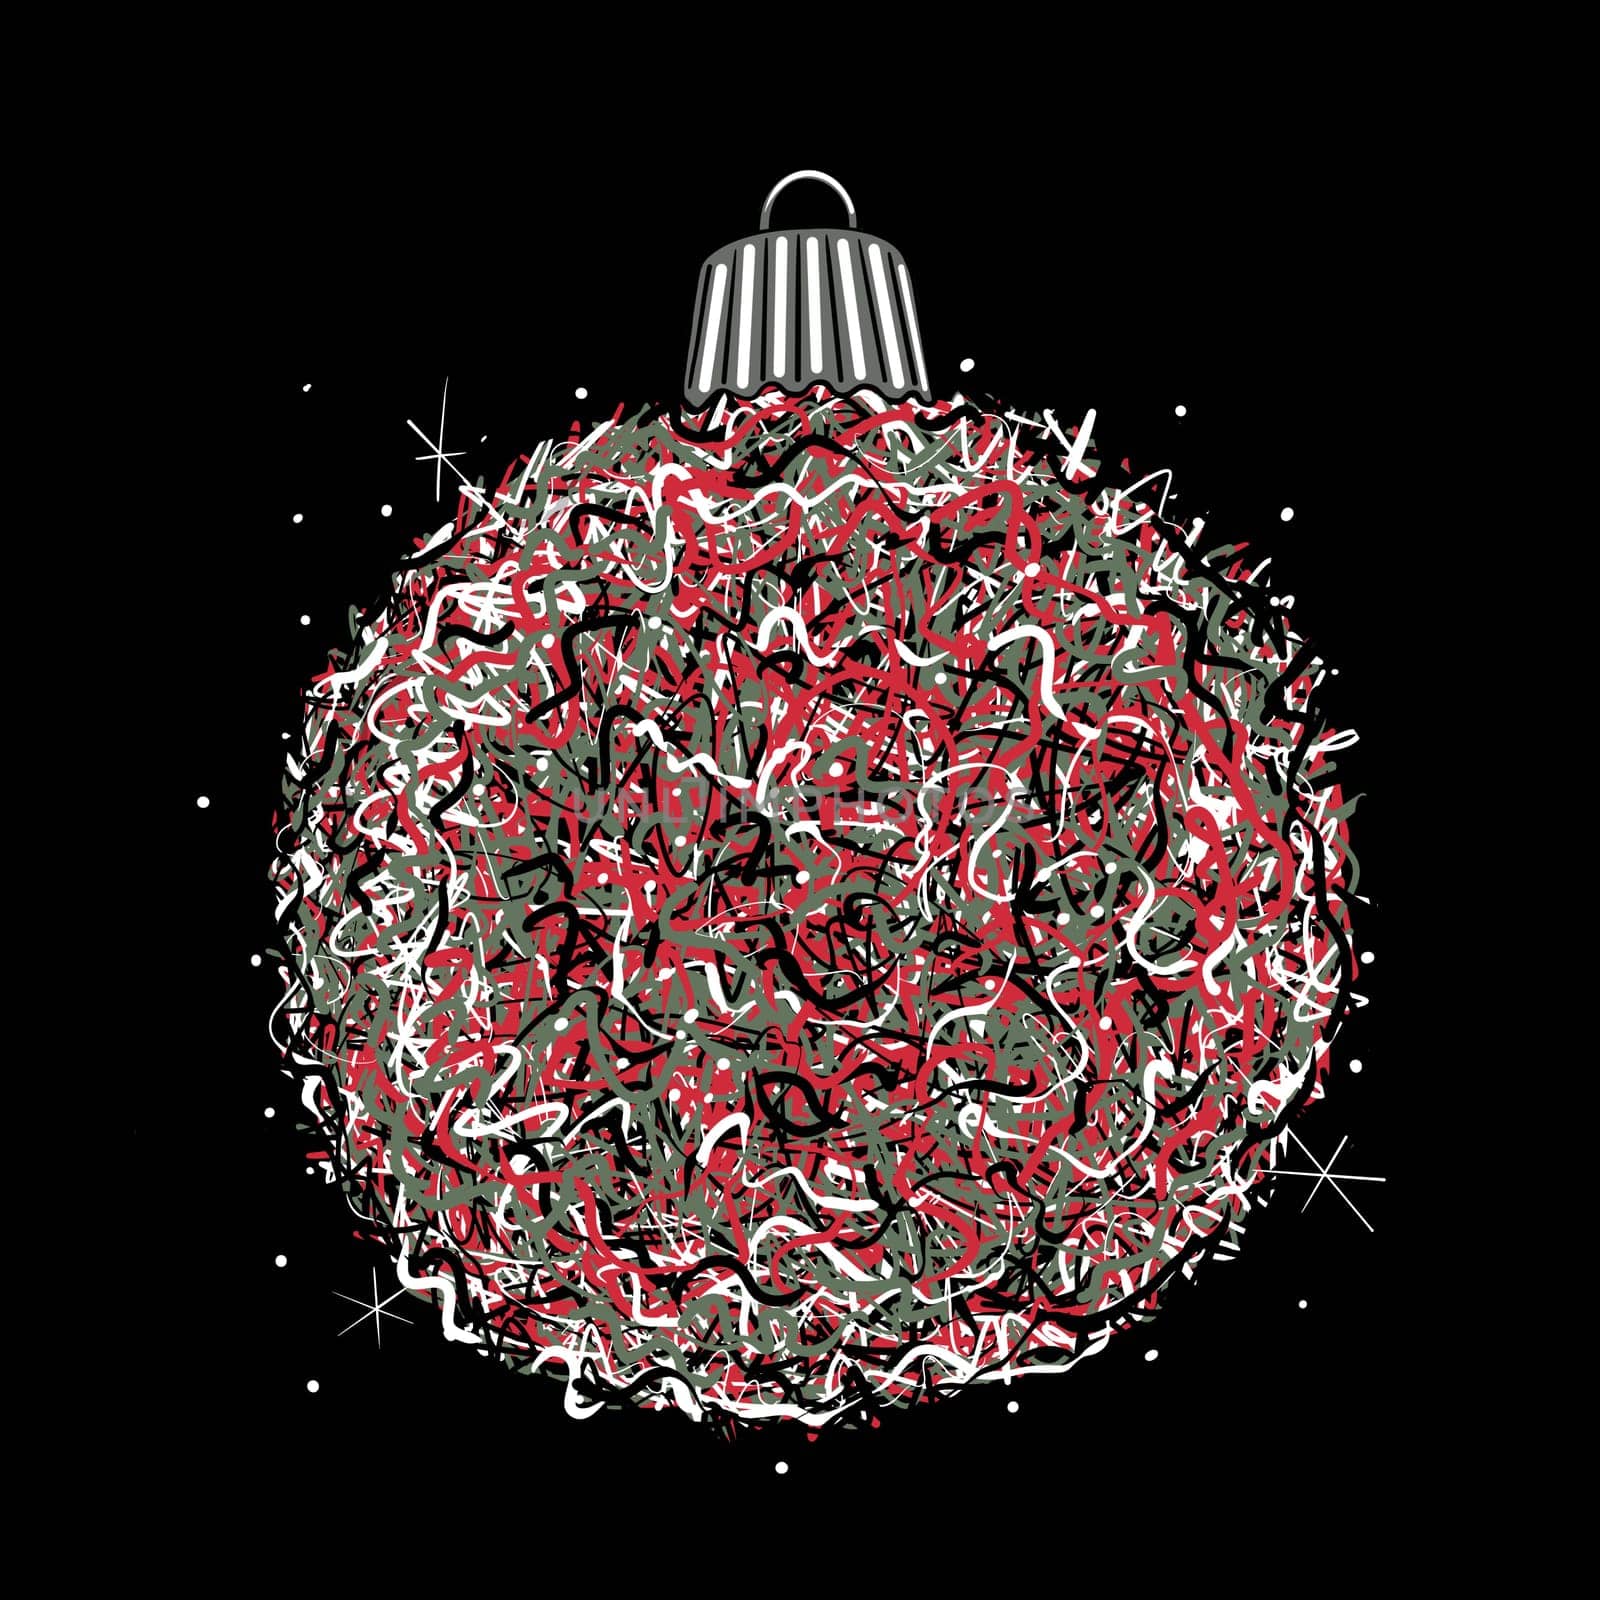 Christmas tree bauble illustration by RusticPuffin